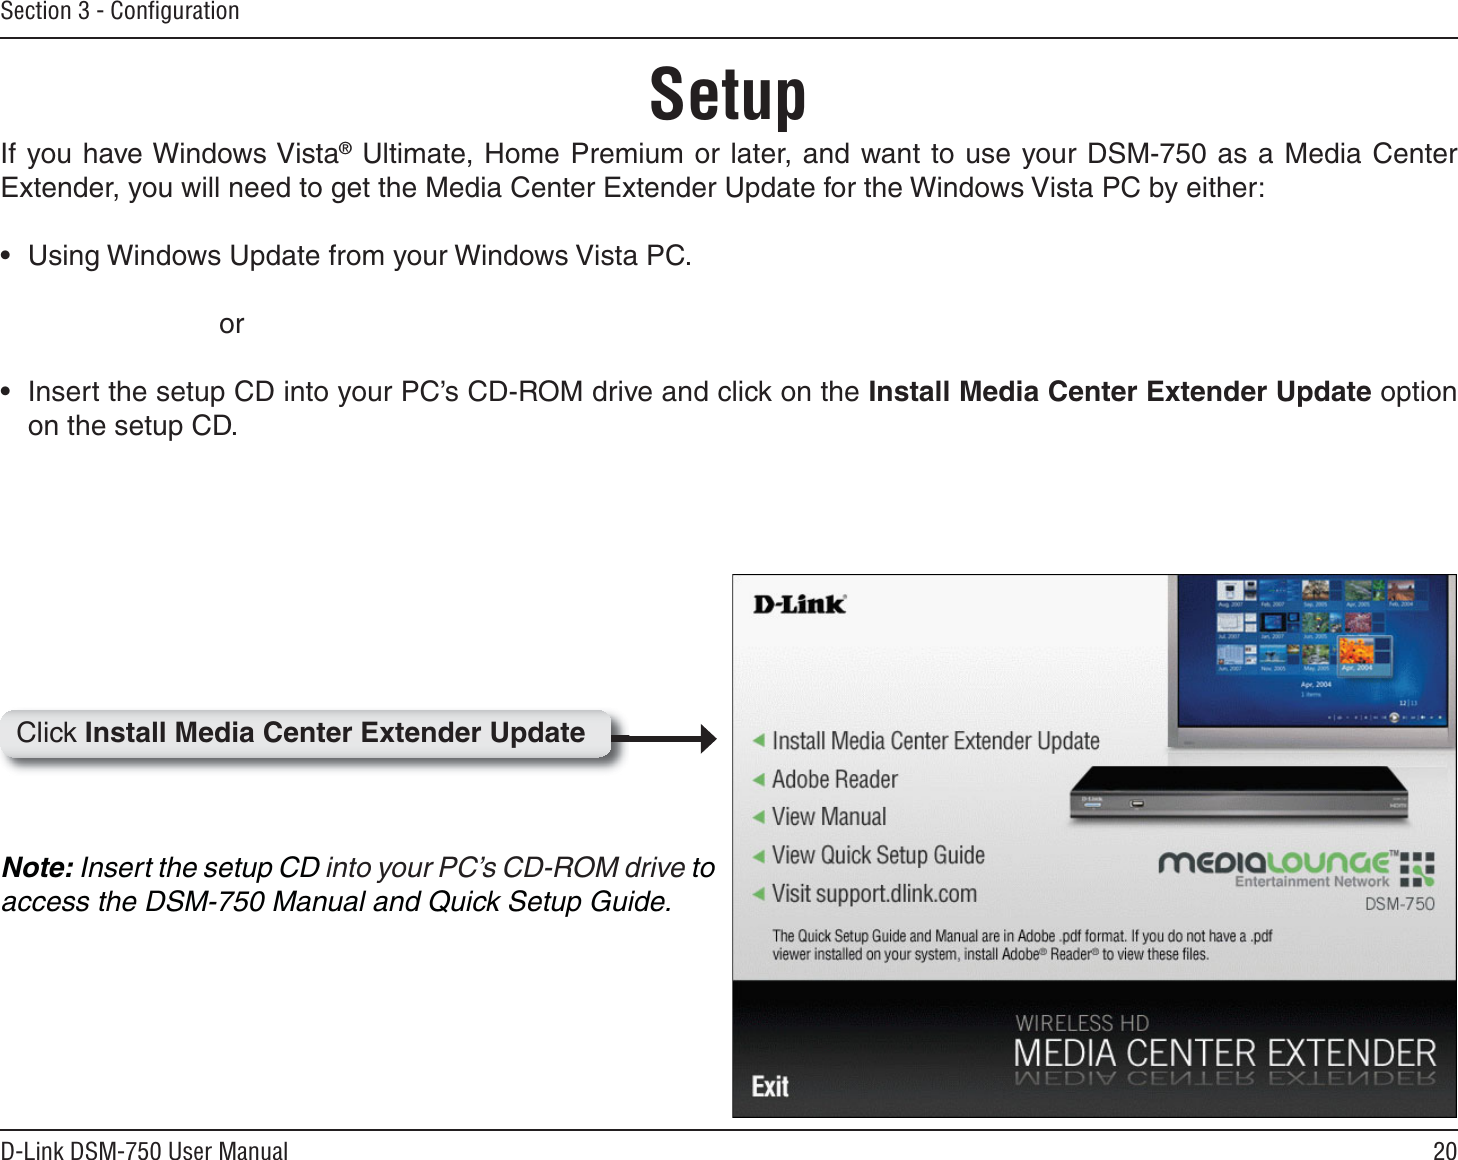 20D-Link DSM-750 User ManualSection 3 - ConﬁgurationIf you have Windows Vista® Ultimate, Home Premium or later, and want to use your DSM-750 as a Media Center Extender, you will need to get the Media Center Extender Update for the Windows Vista PC by either:• Using Windows Update from your Windows Vista PC.       or• Insert the setup CD into your PC’s CD-ROM drive and click on the Install Media Center Extender Update option on the setup CD.Note: Insert the setup CD into your PC’s CD-ROM drive toaccess the DSM-750 Manual and Quick Setup Guide.SetupClick Install Media Center Extender Update